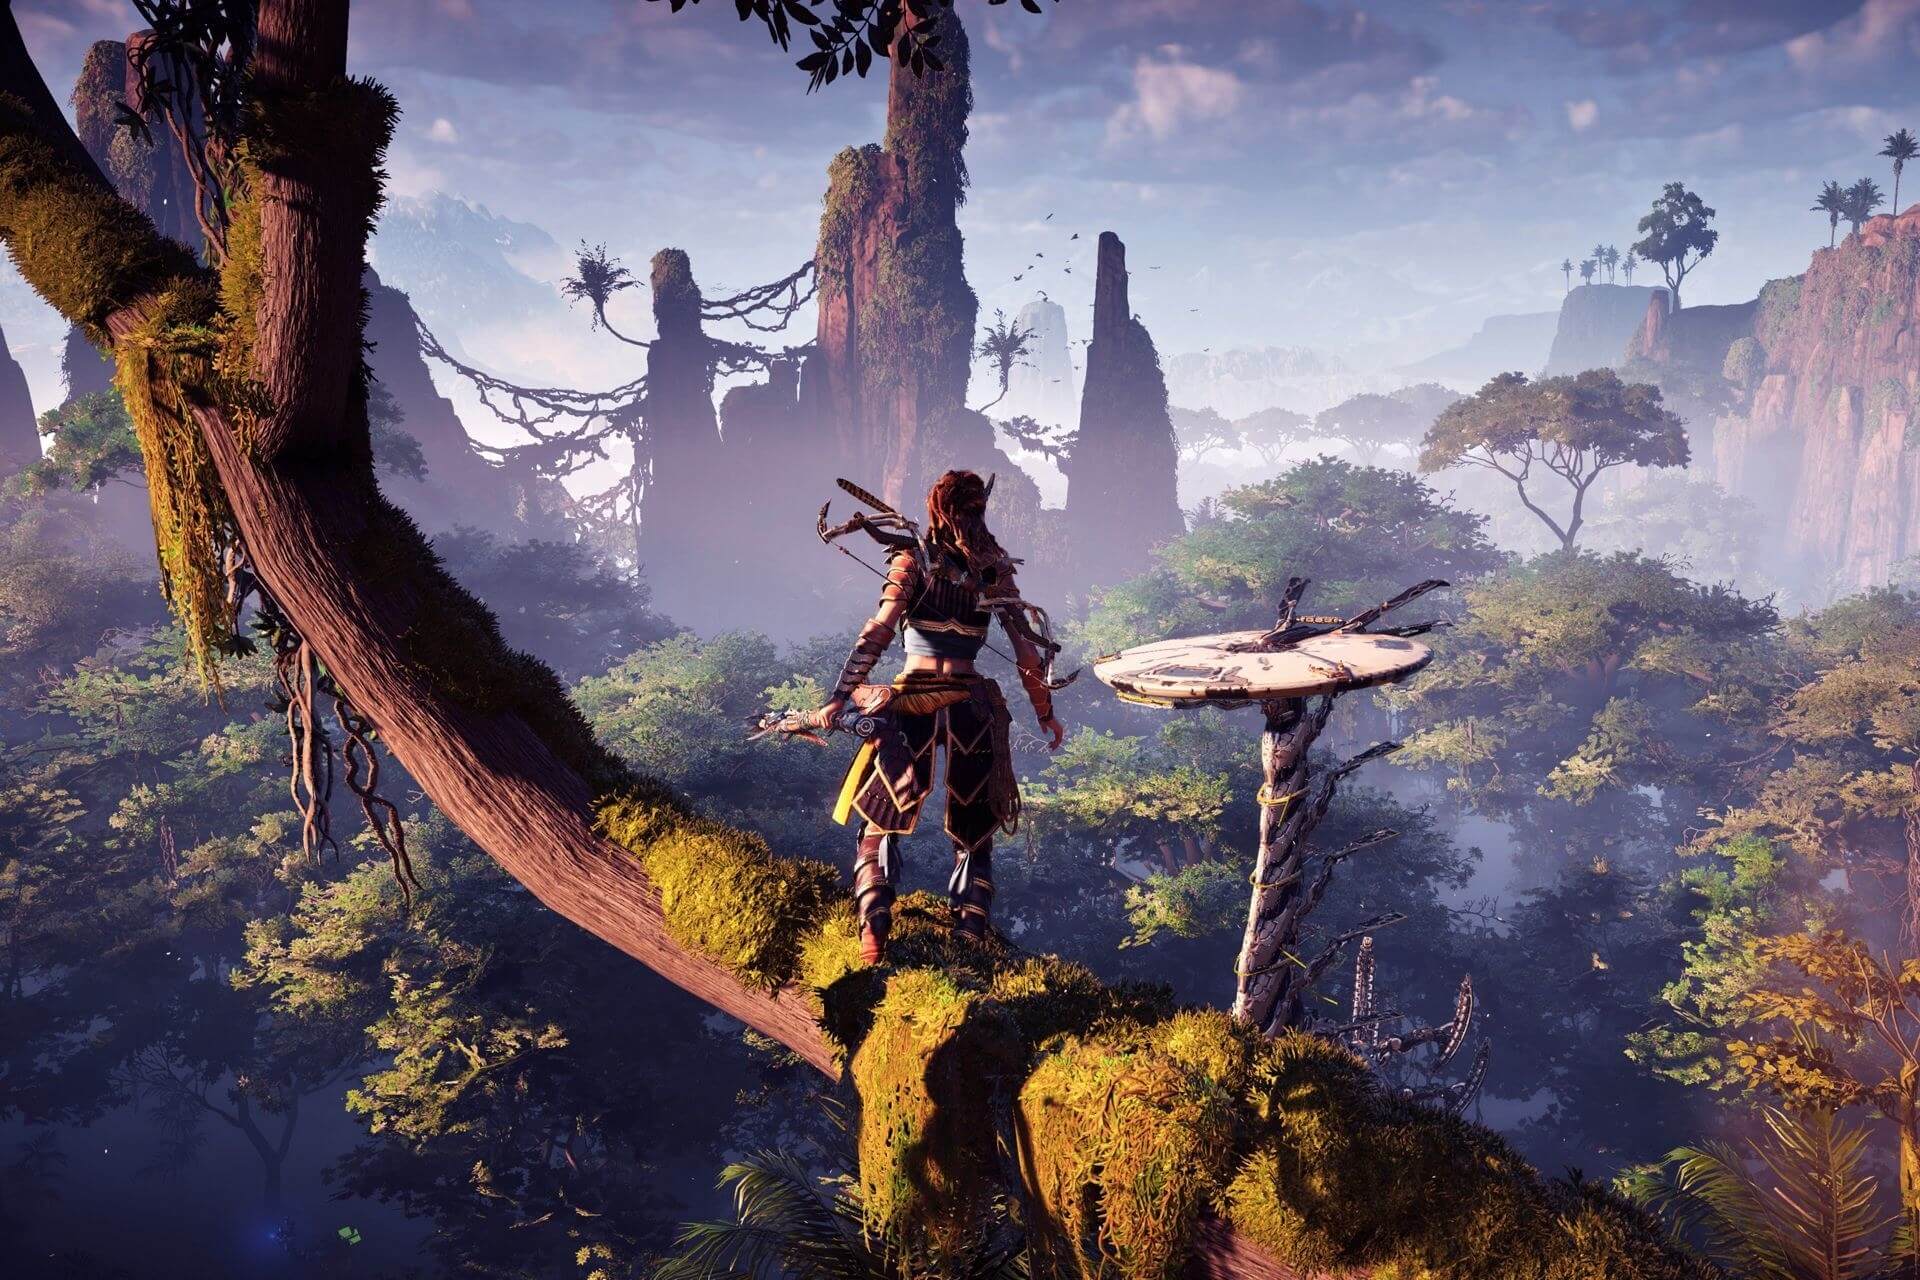 Sony is giving away 10 more PlayStation games, including Horizon Zero Dawn